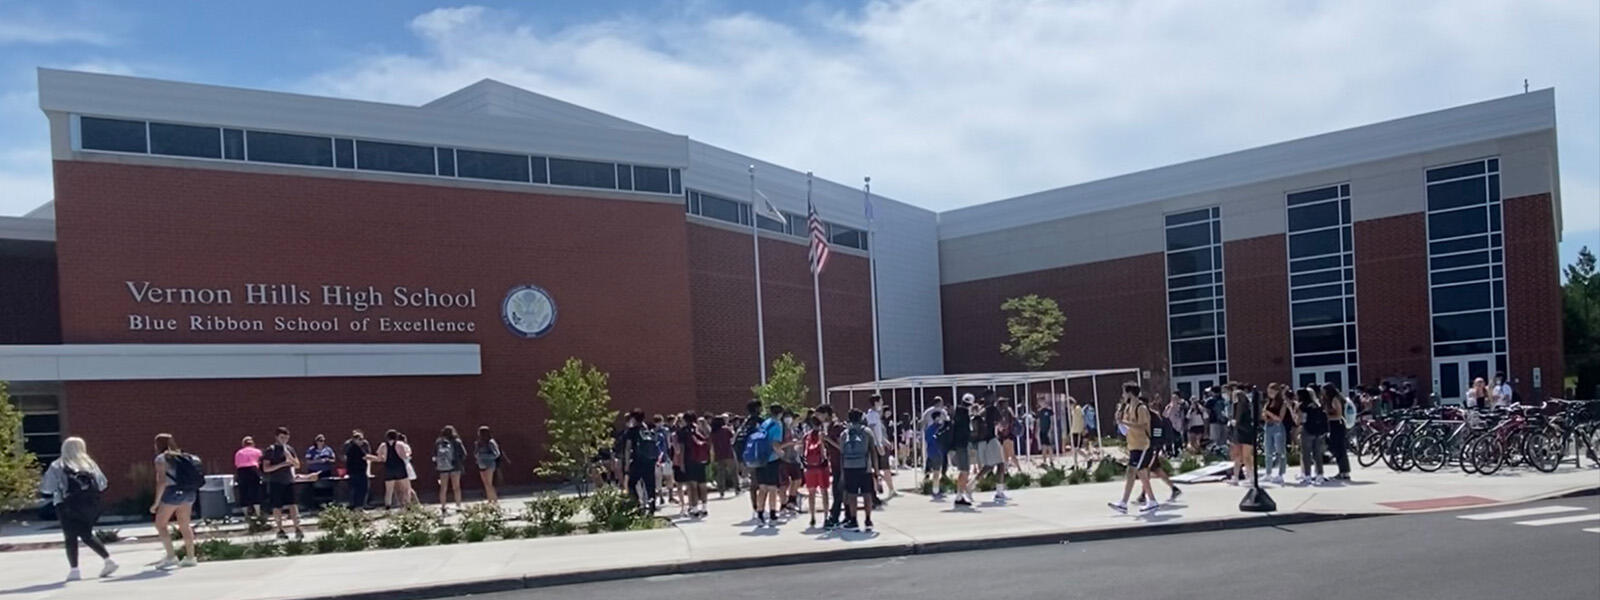 Photo of the VHHS Plaza during a student event. Student splay games and enjoy social time.